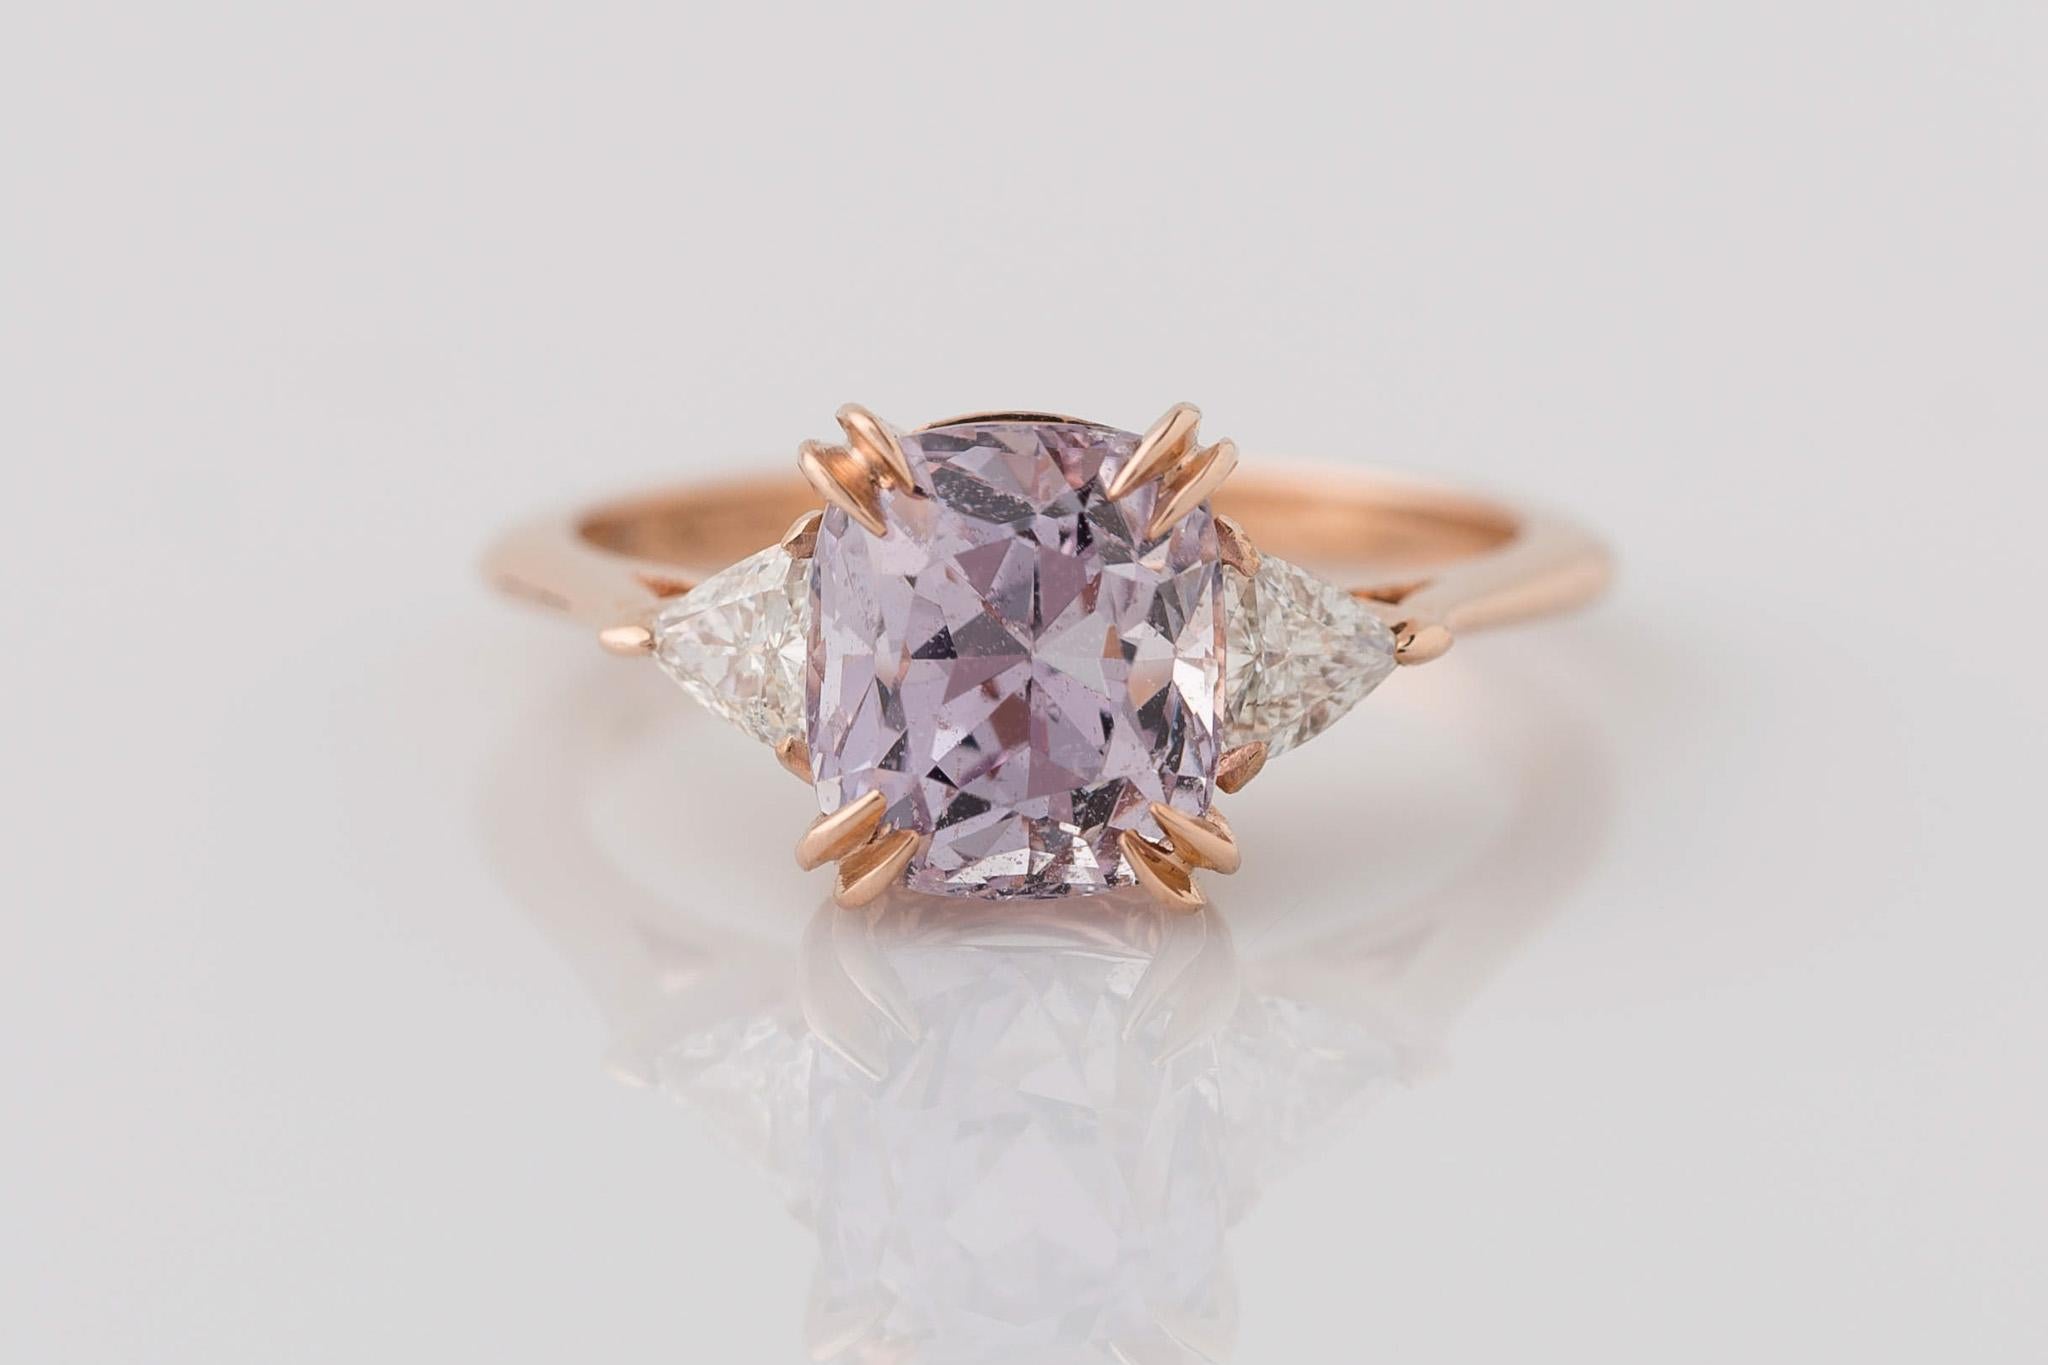 Indulge in elegance with our 14K Rose Gold GIA Certified 3-Stone Cushion Cut Pink Sapphire Ring. The centerpiece, a GIA certified 3.28 Ct. unheated sapphire, boasts a captivating light lilac purple hue with transparent clarity. Accompanying the